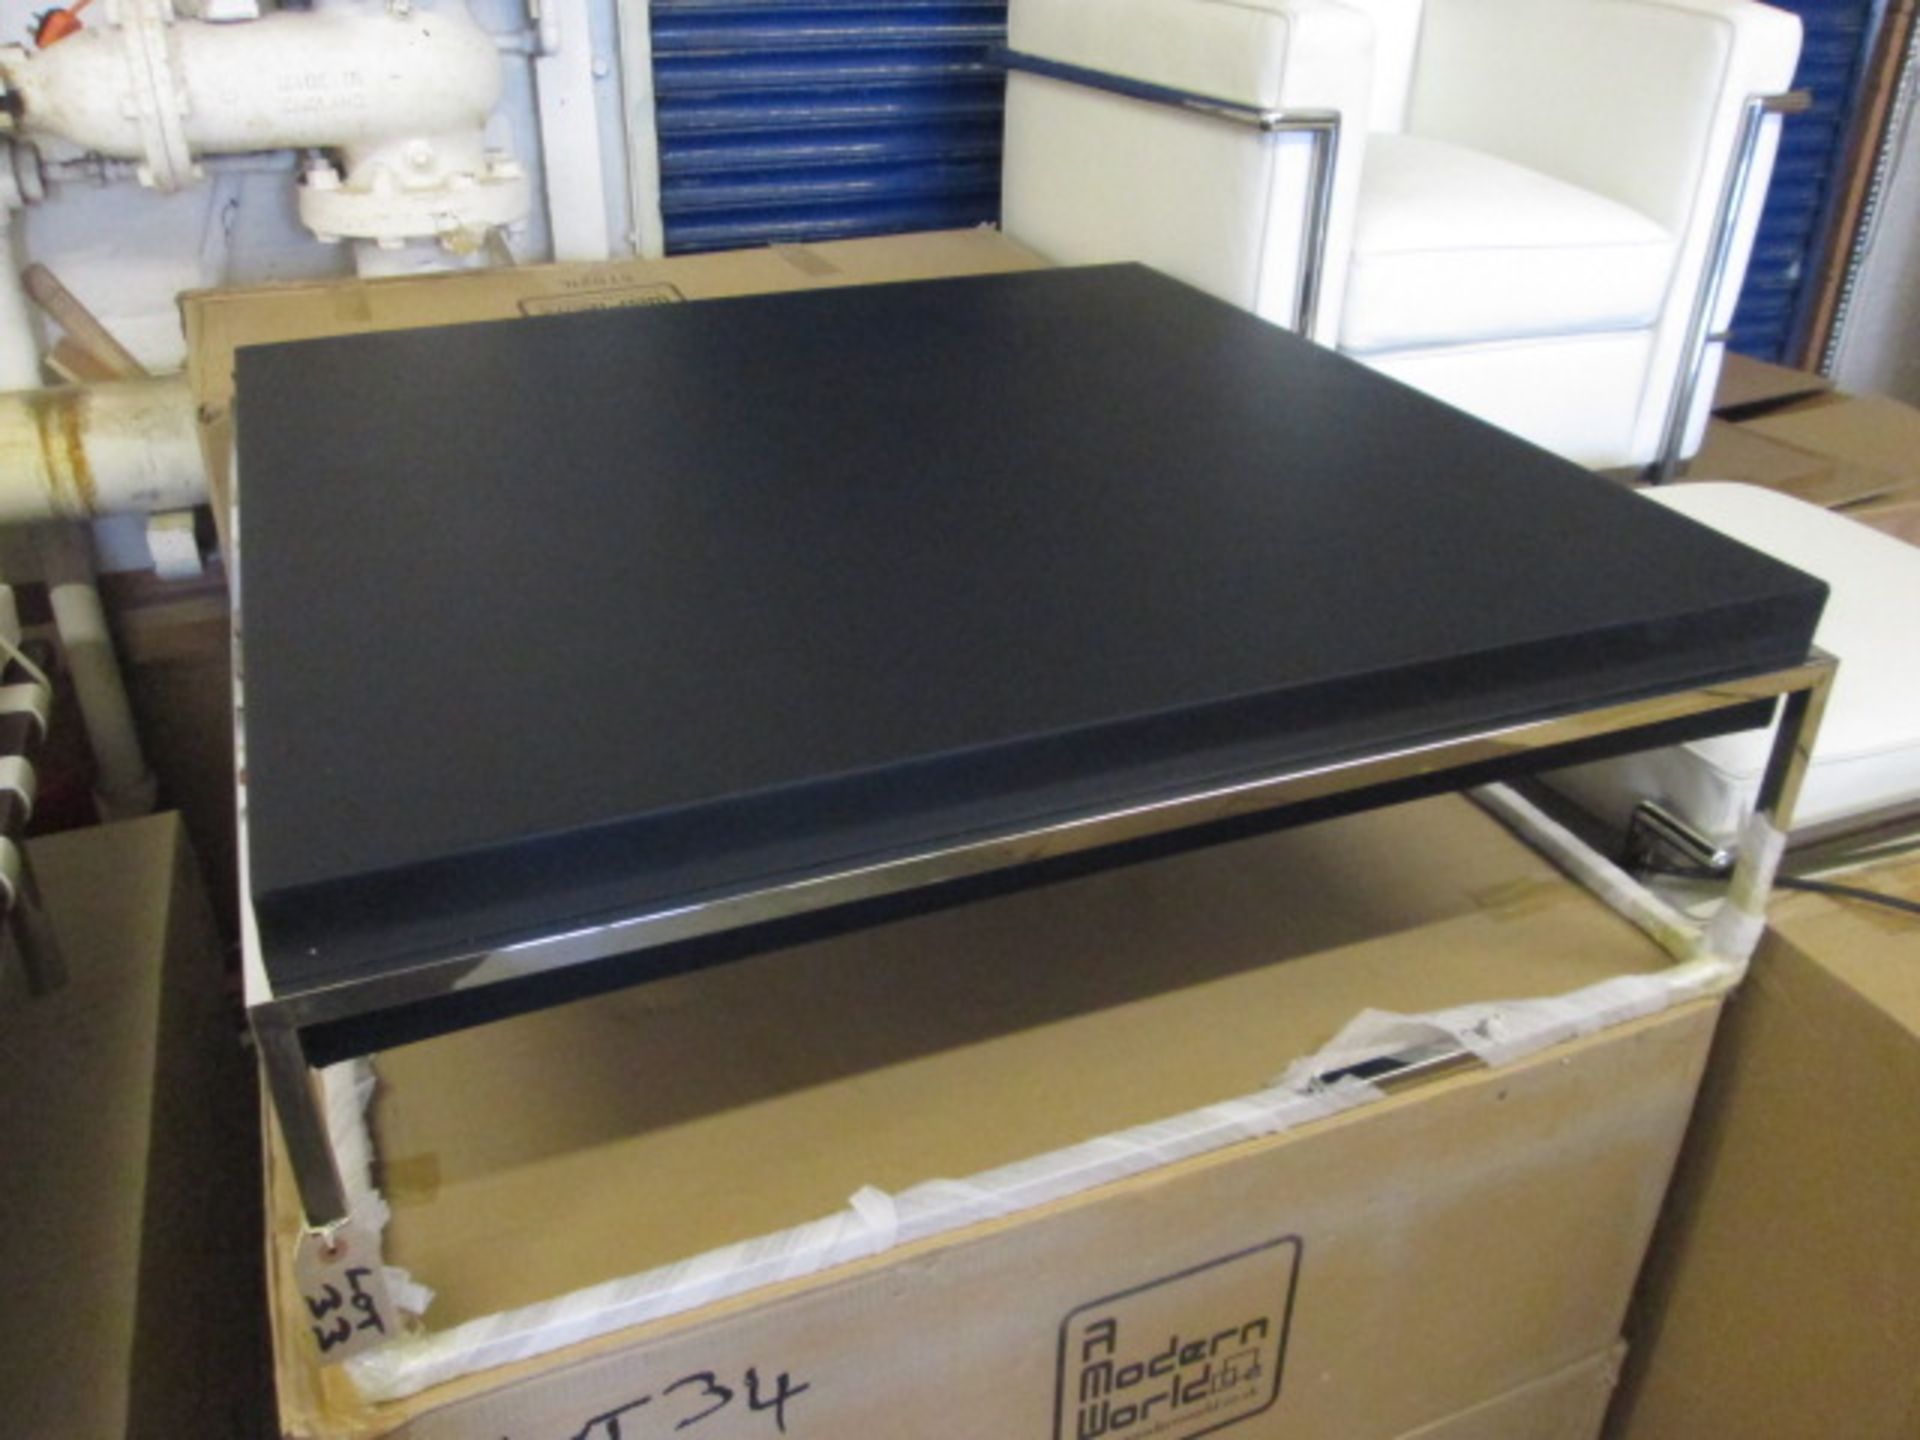 Boxed/As New - Auctor FT Chrome Frame with Black Faux Leather Coffee Table Top (Model CT021L). - Image 2 of 4